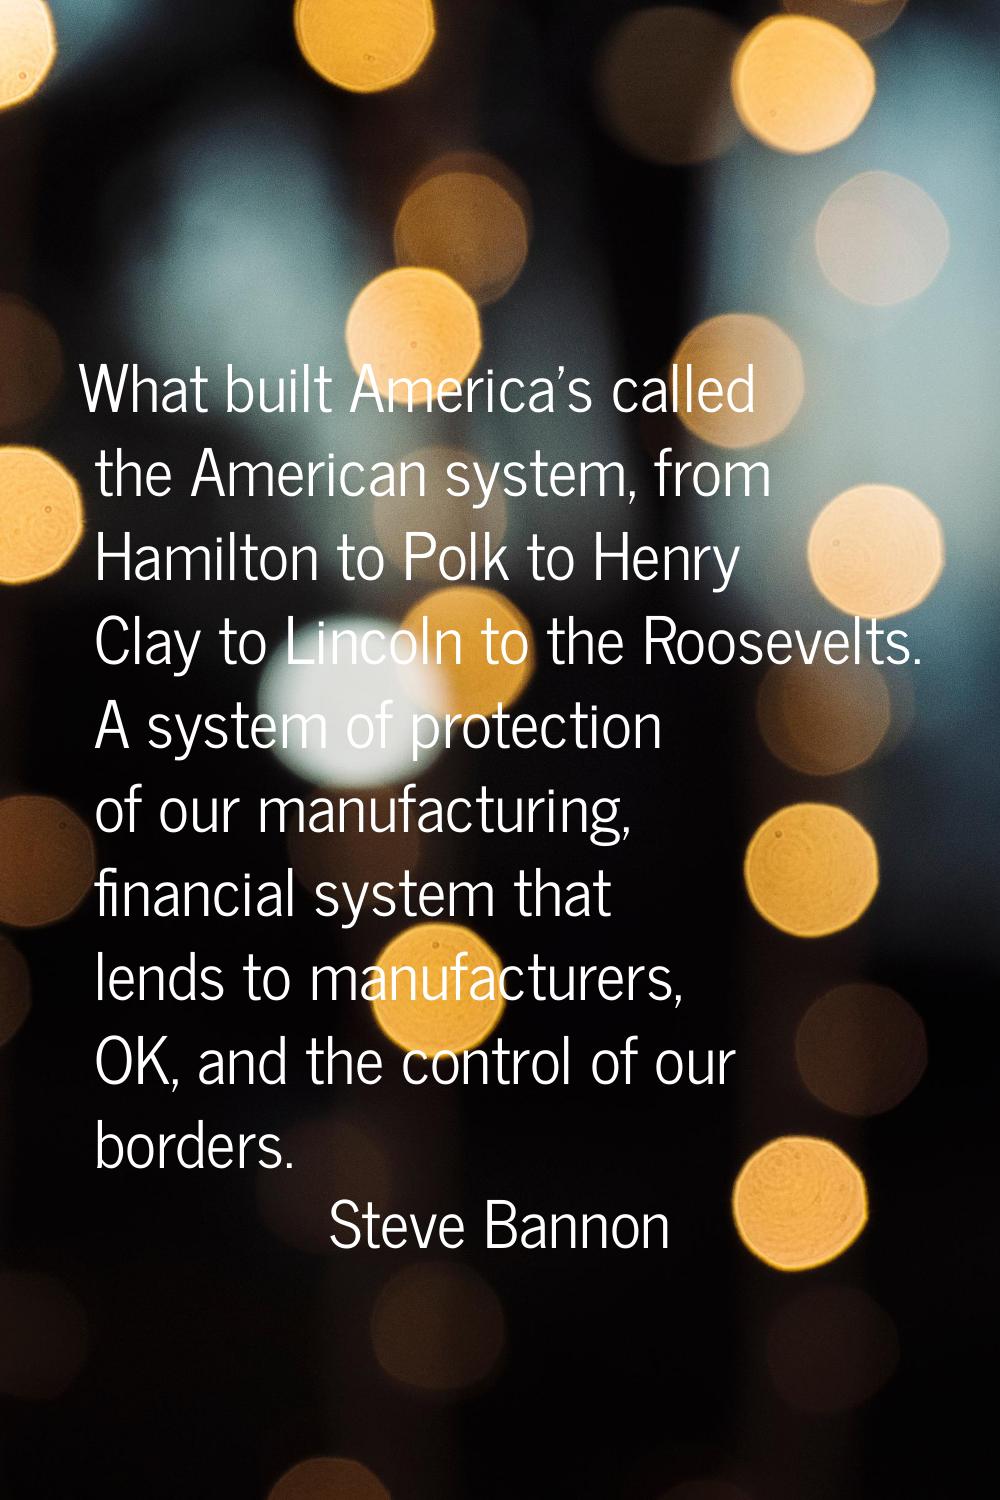 What built America's called the American system, from Hamilton to Polk to Henry Clay to Lincoln to 